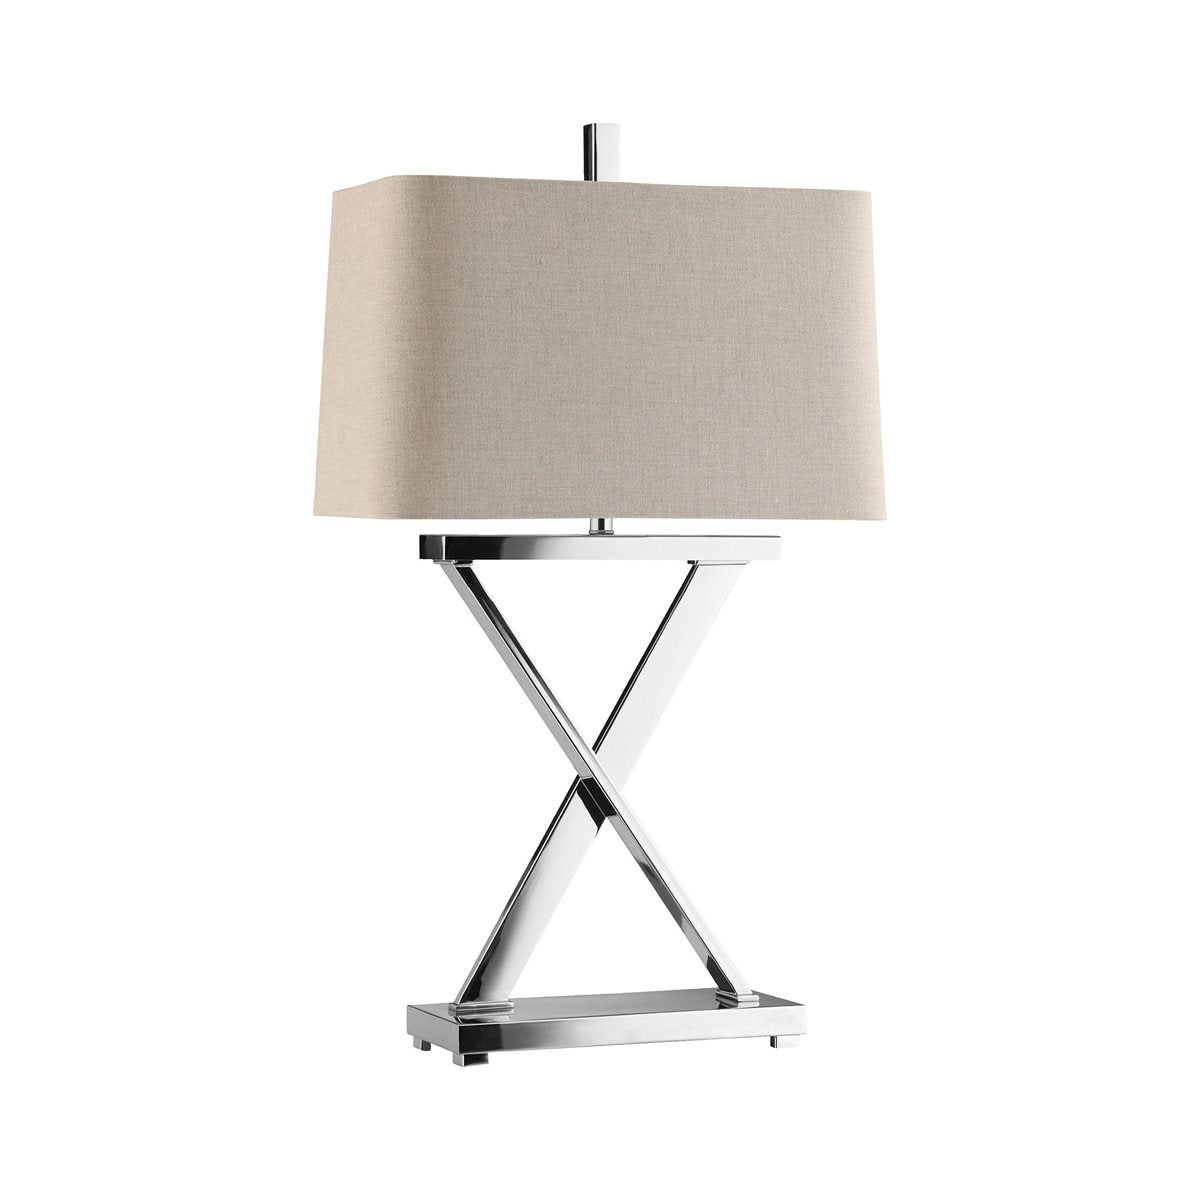 Stein World Max Table Lamp 90005